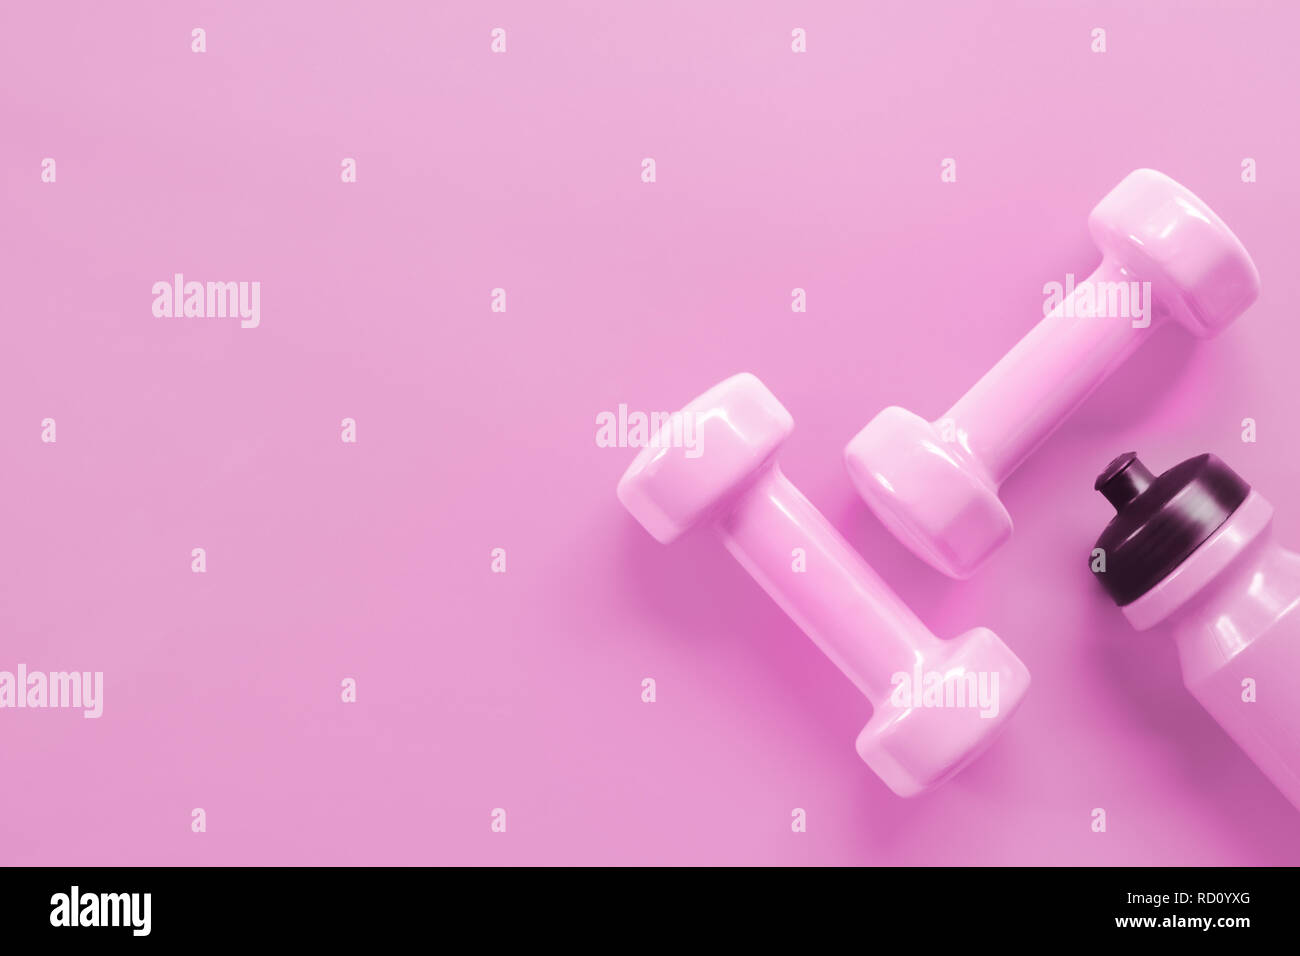 Pink Dumbbells for Fitness Workouts